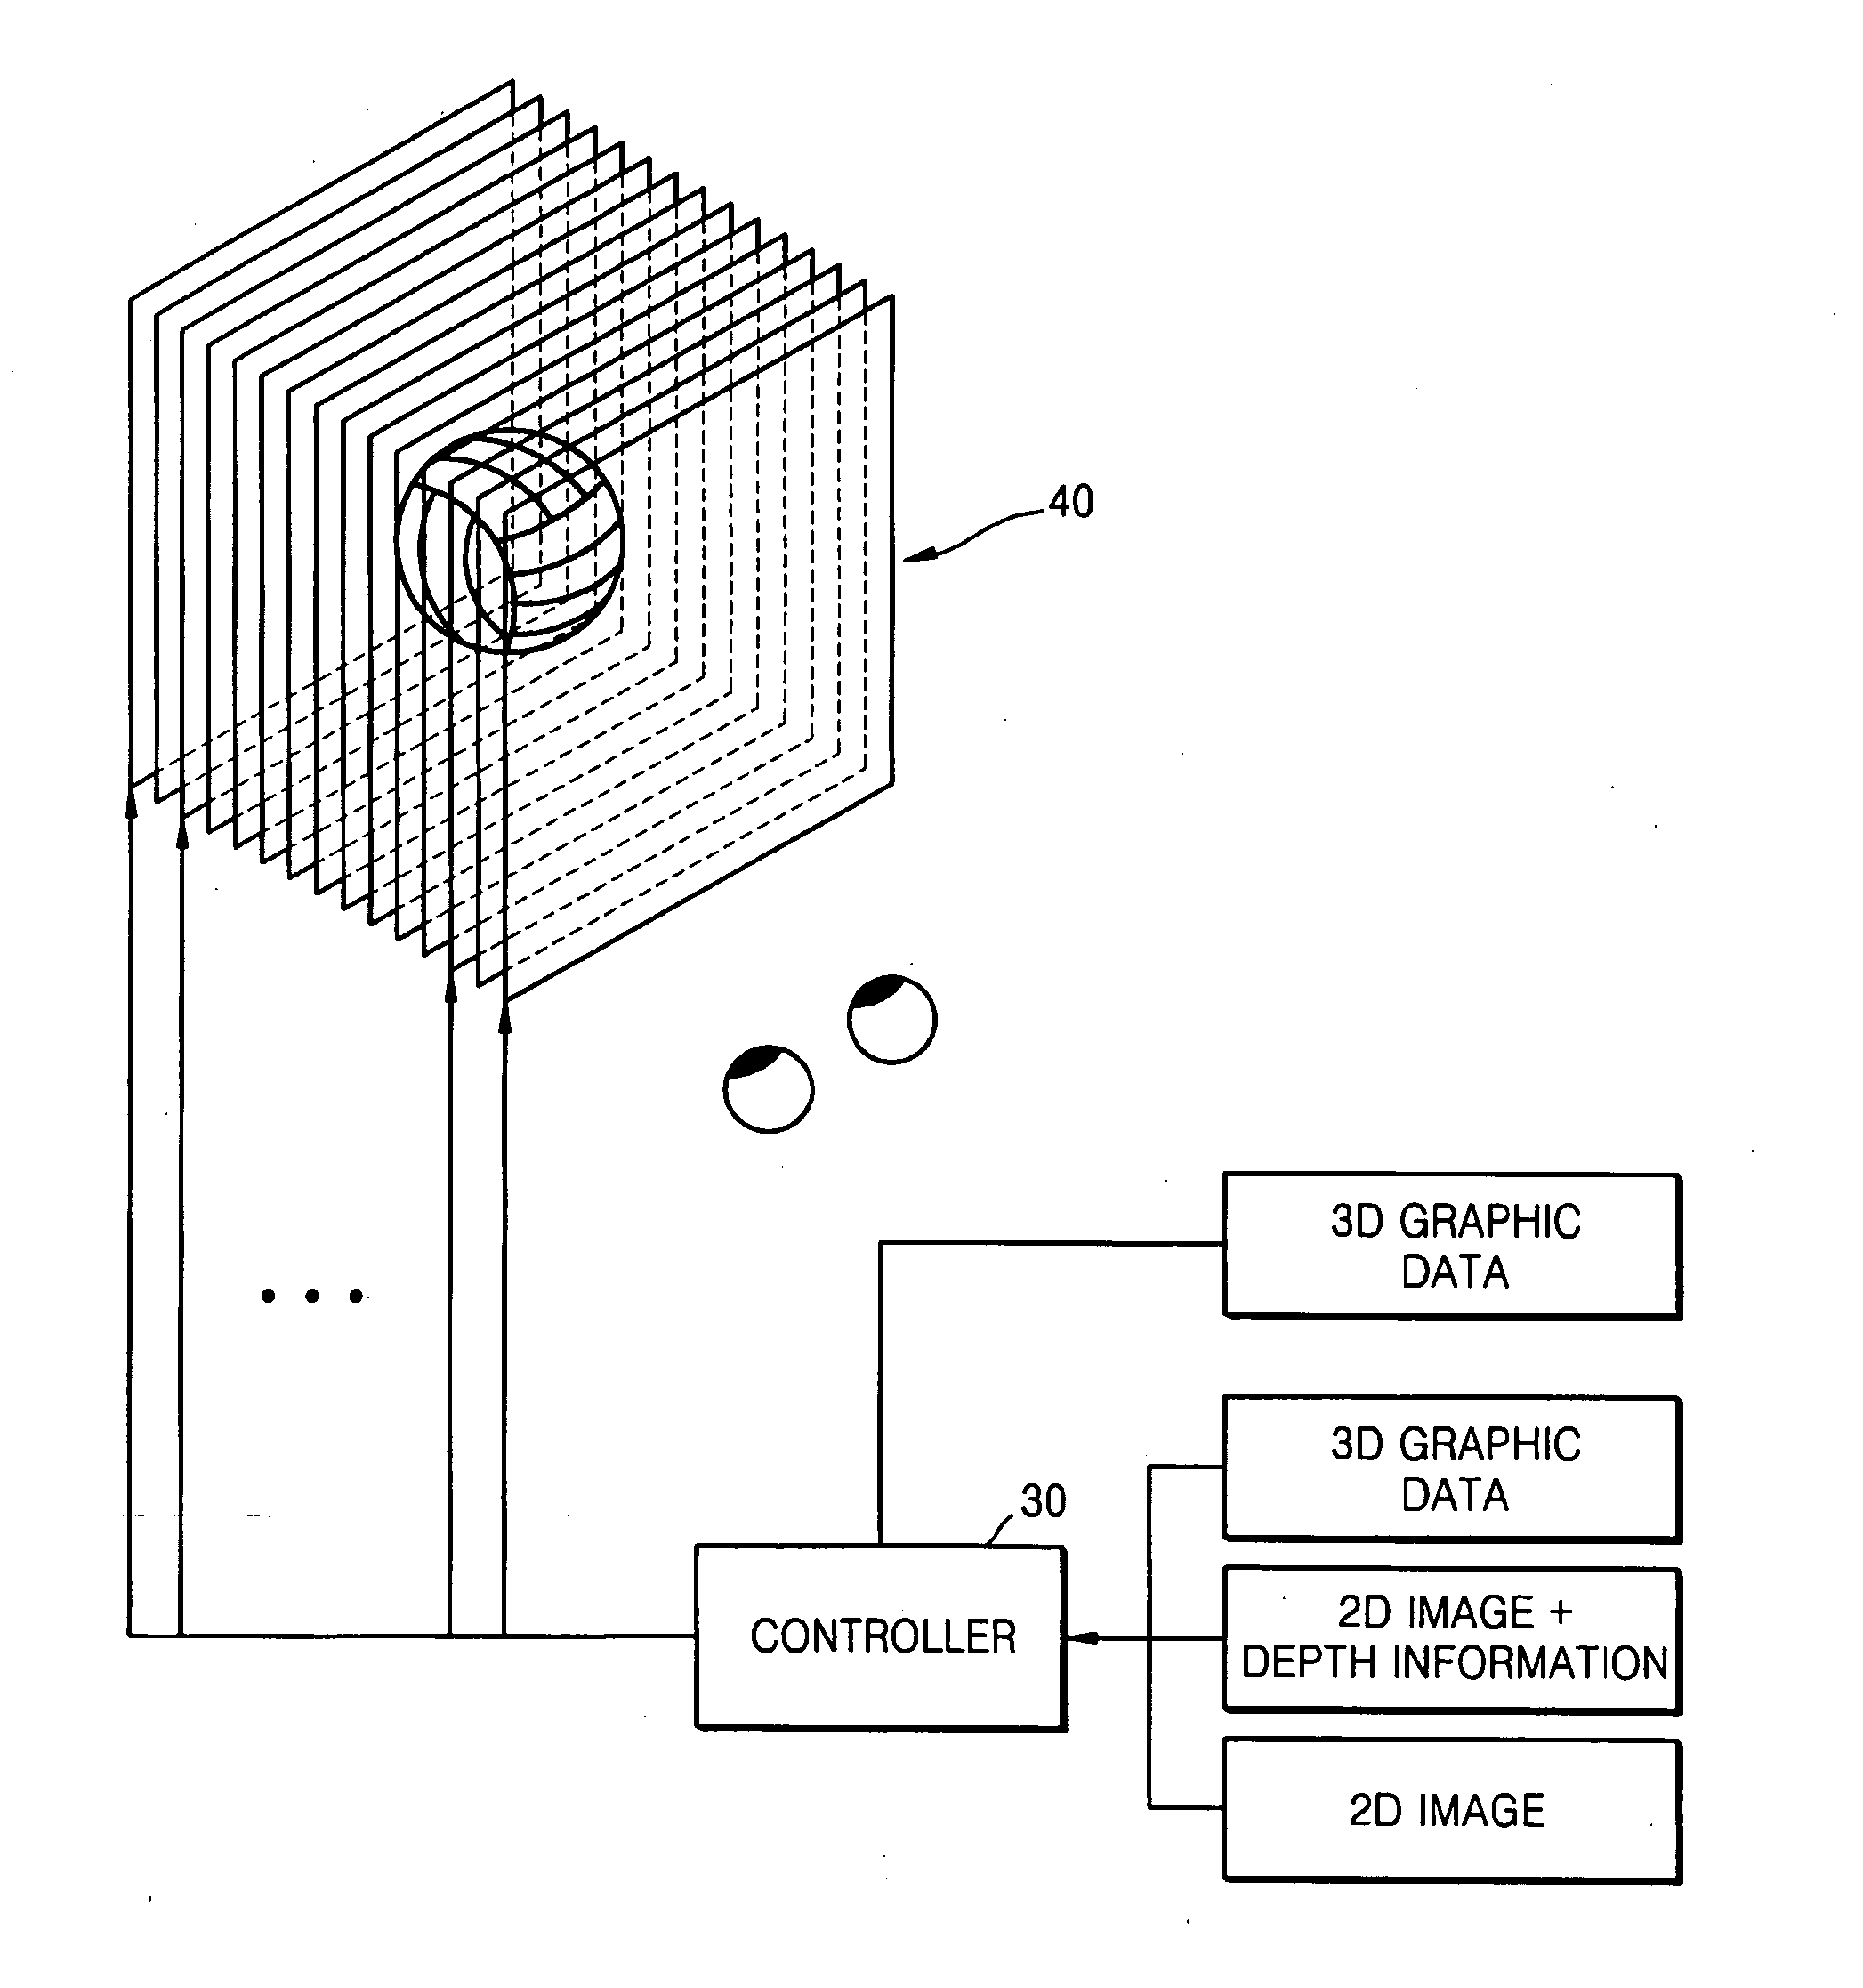 Volumetric three-dimentional display panel and system using multi-layered organic light emitting devices